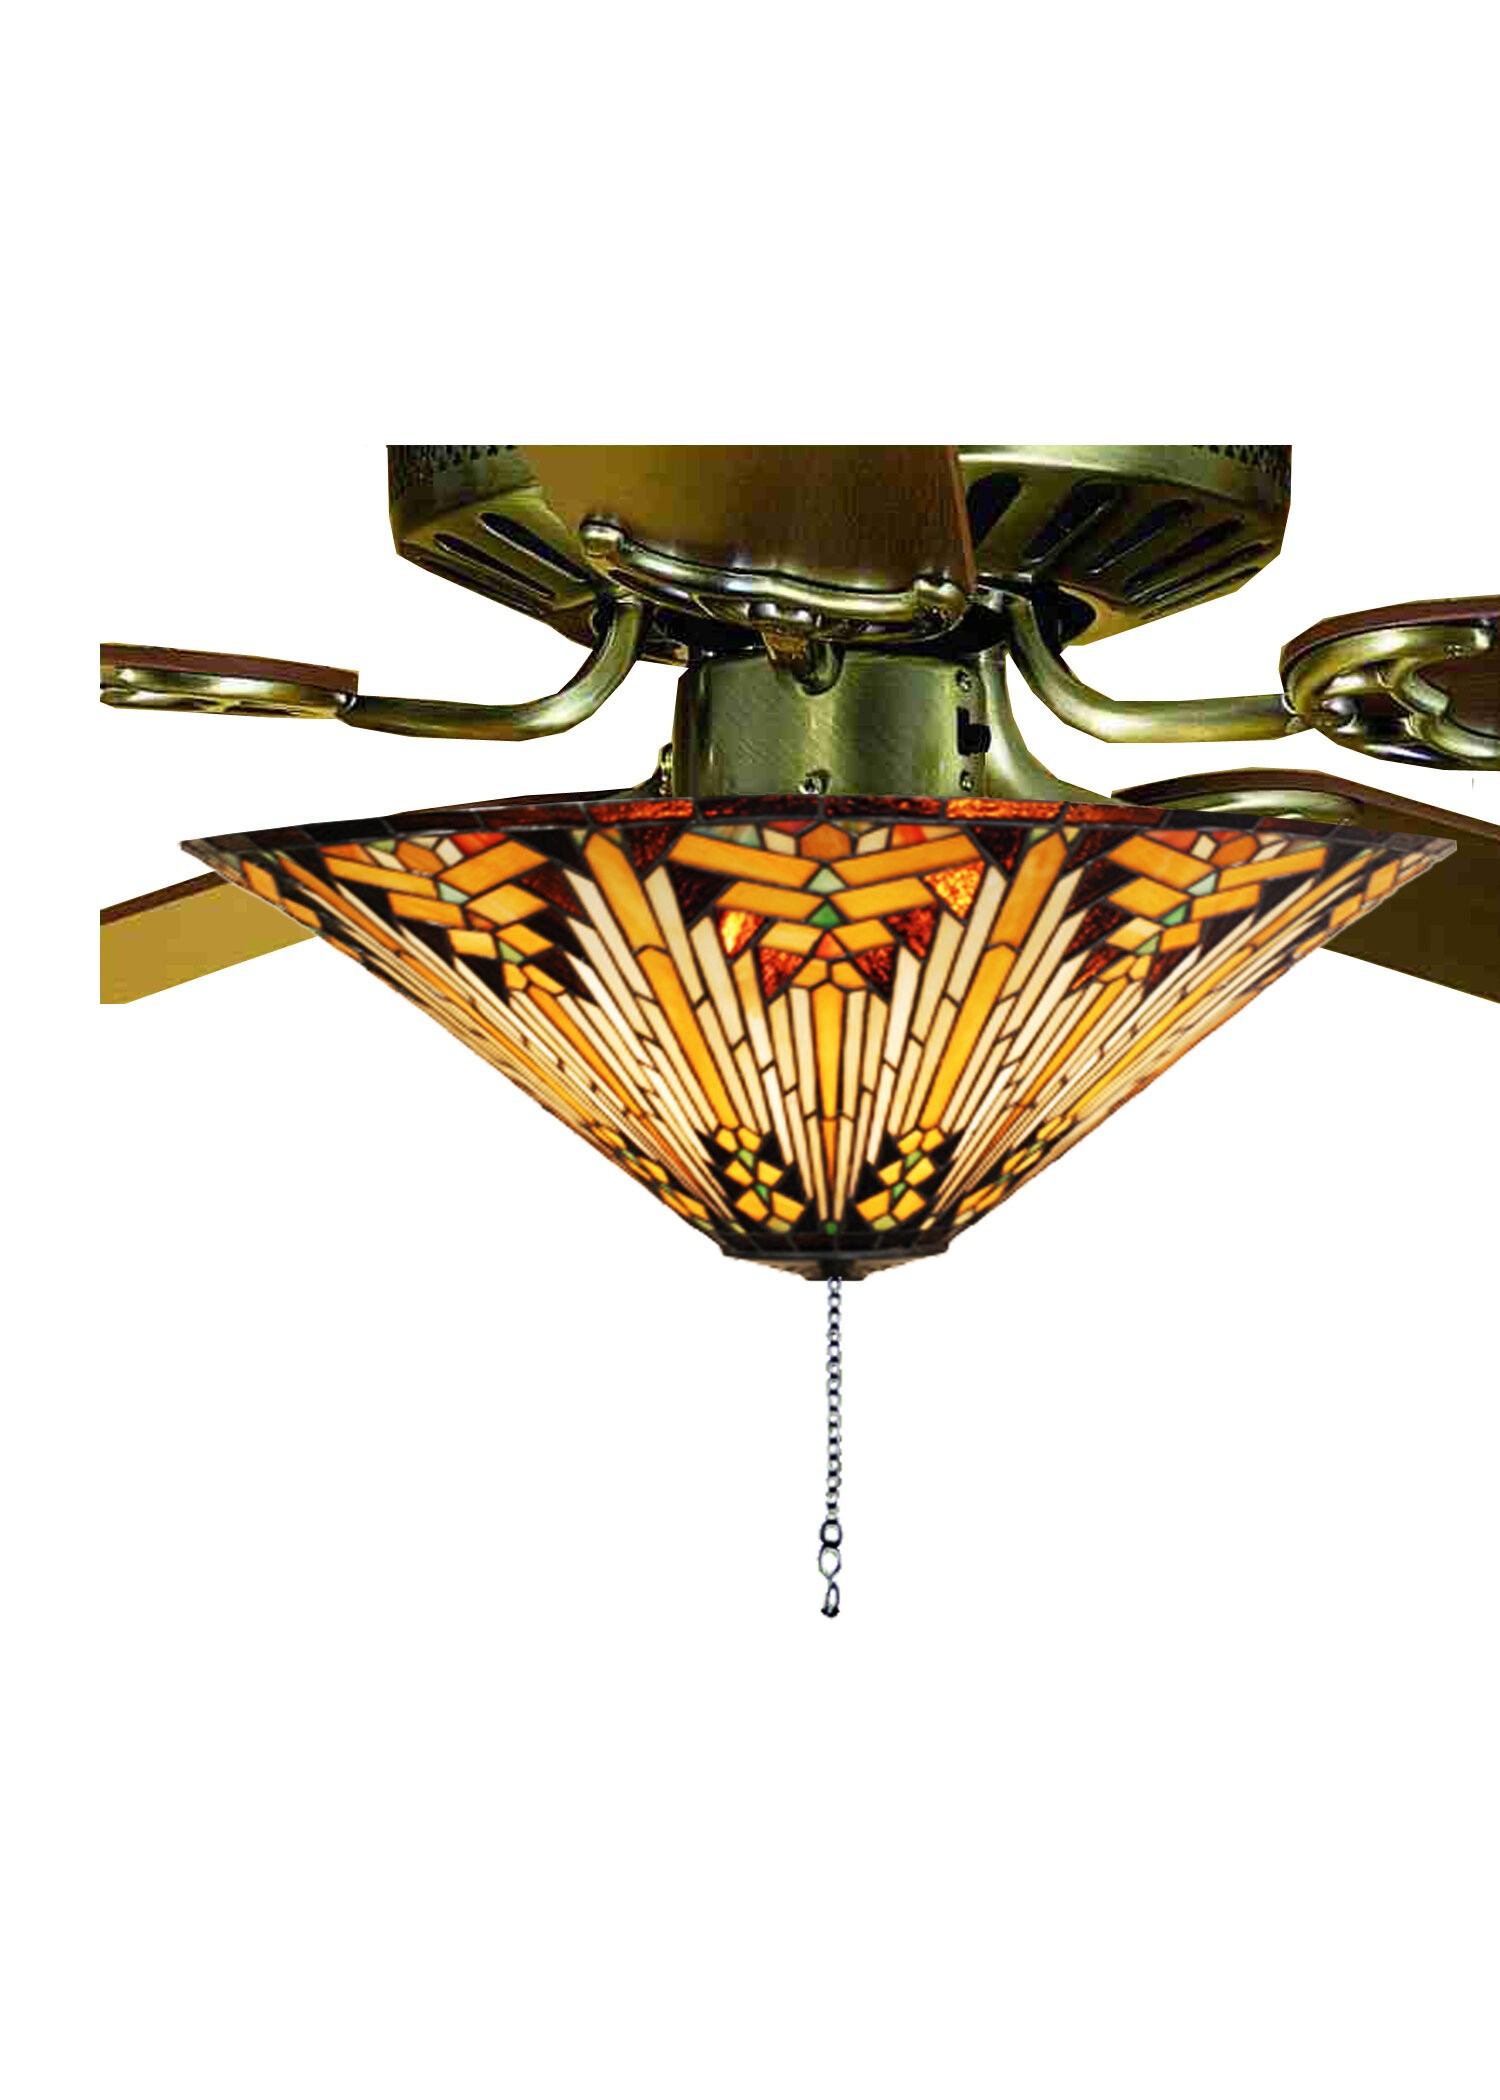 Stained glass ceiling fan shades 3